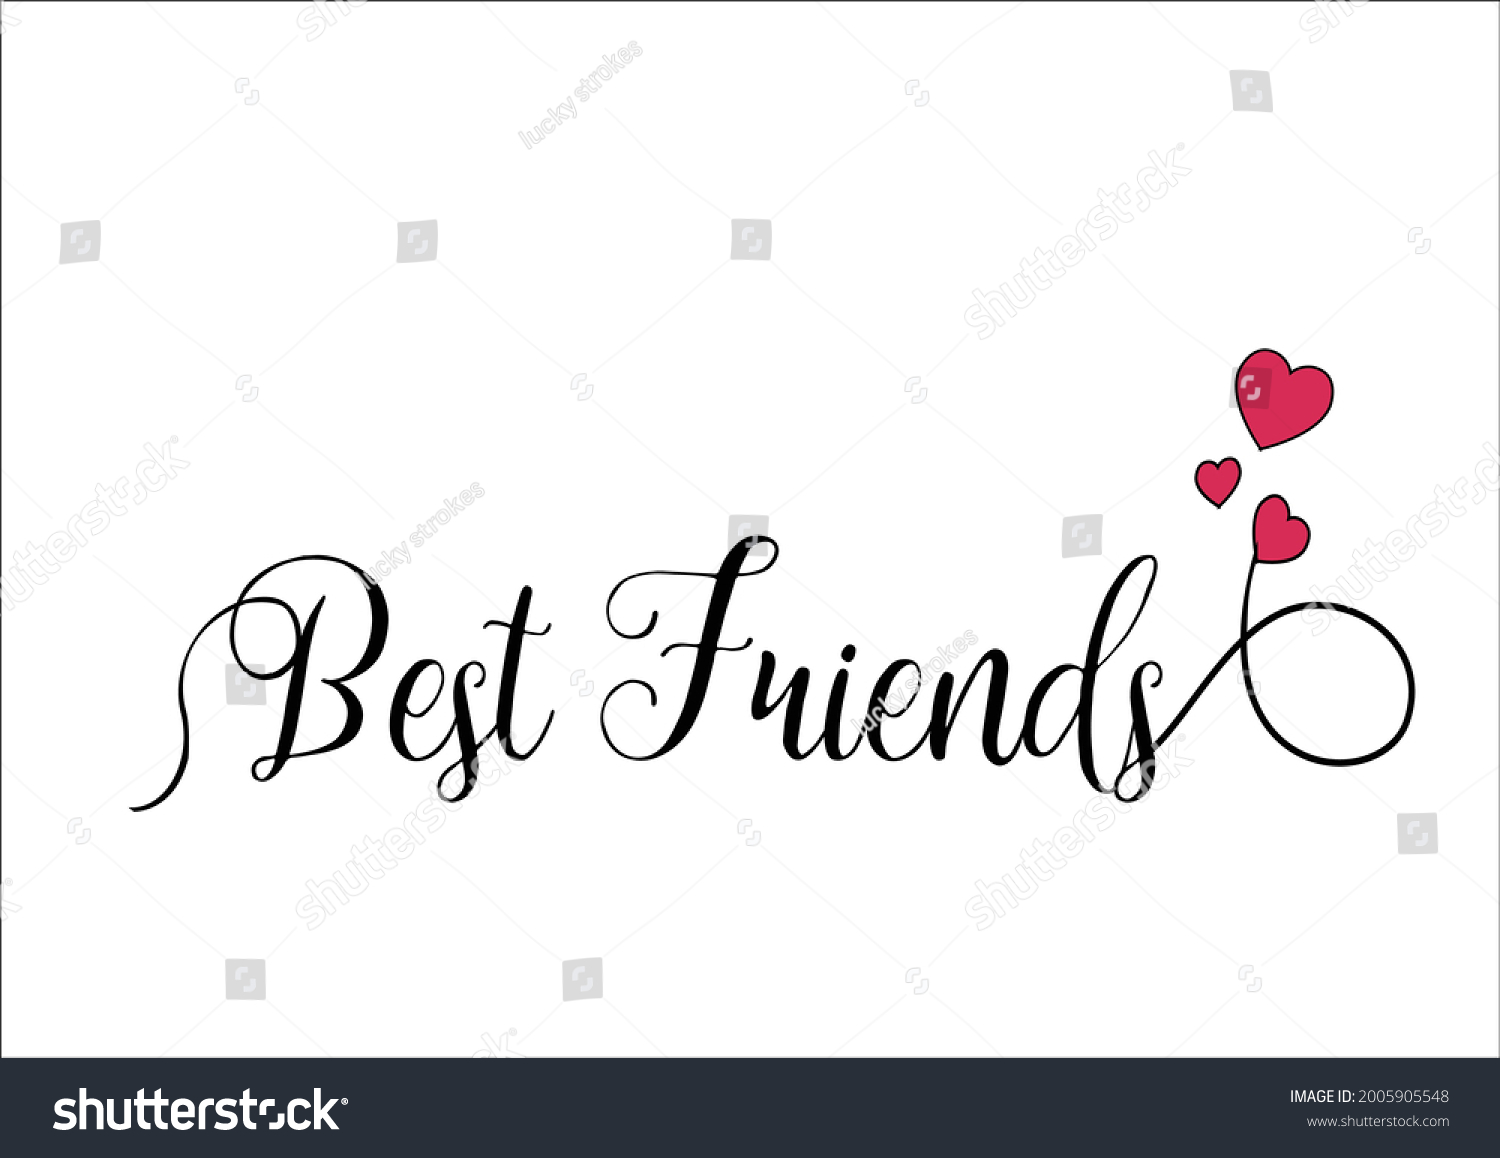 SVG of best friends forever  summer time happiness ı love summer days lettering hand drawn vector art sun flower lettering hand drawn vector art positive stationary bff friendship soul sister with red hearts svg